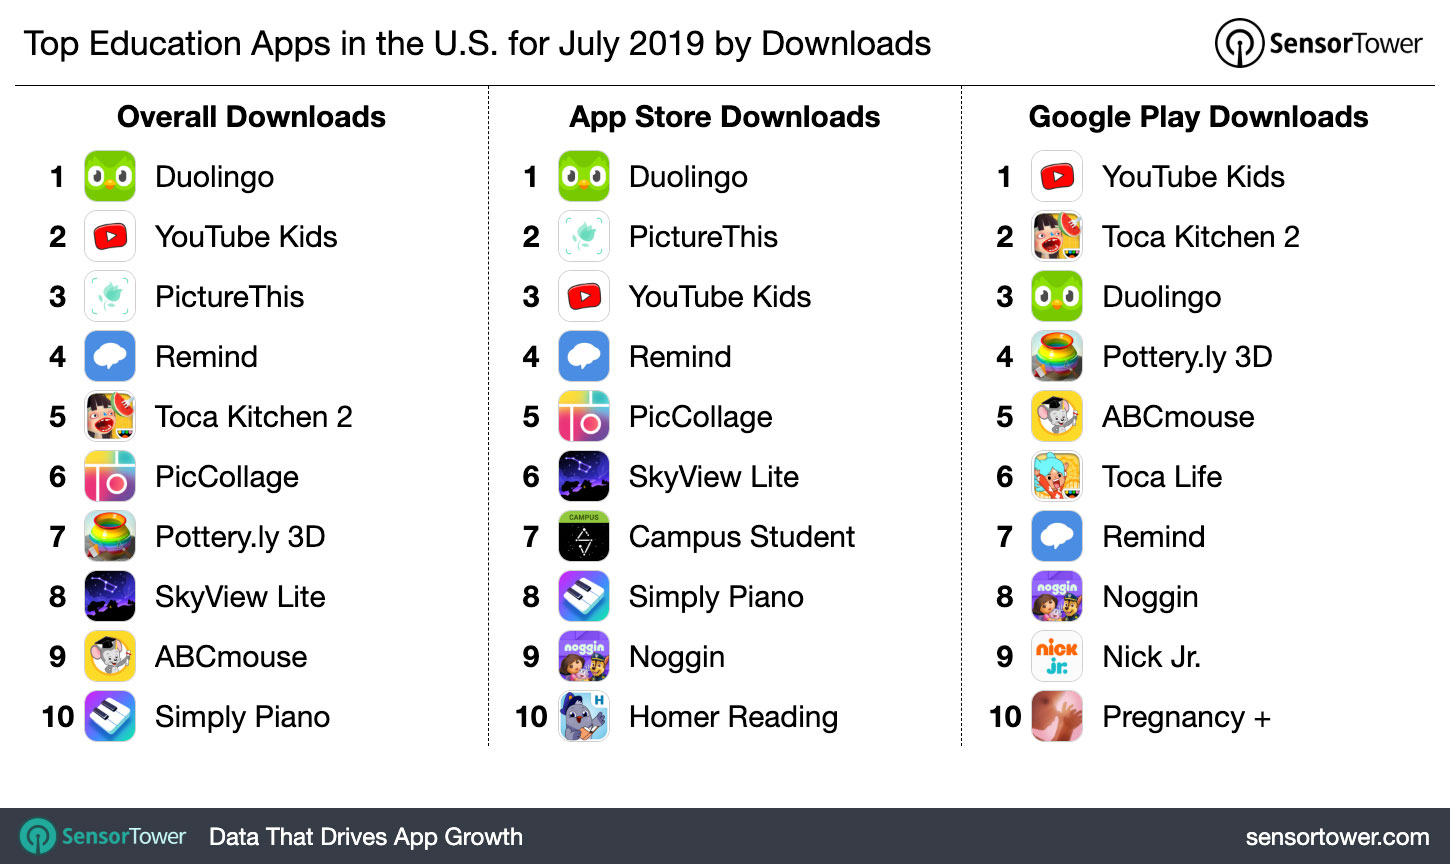 Top Education Apps in the U.S. for July 2019 by Downloads